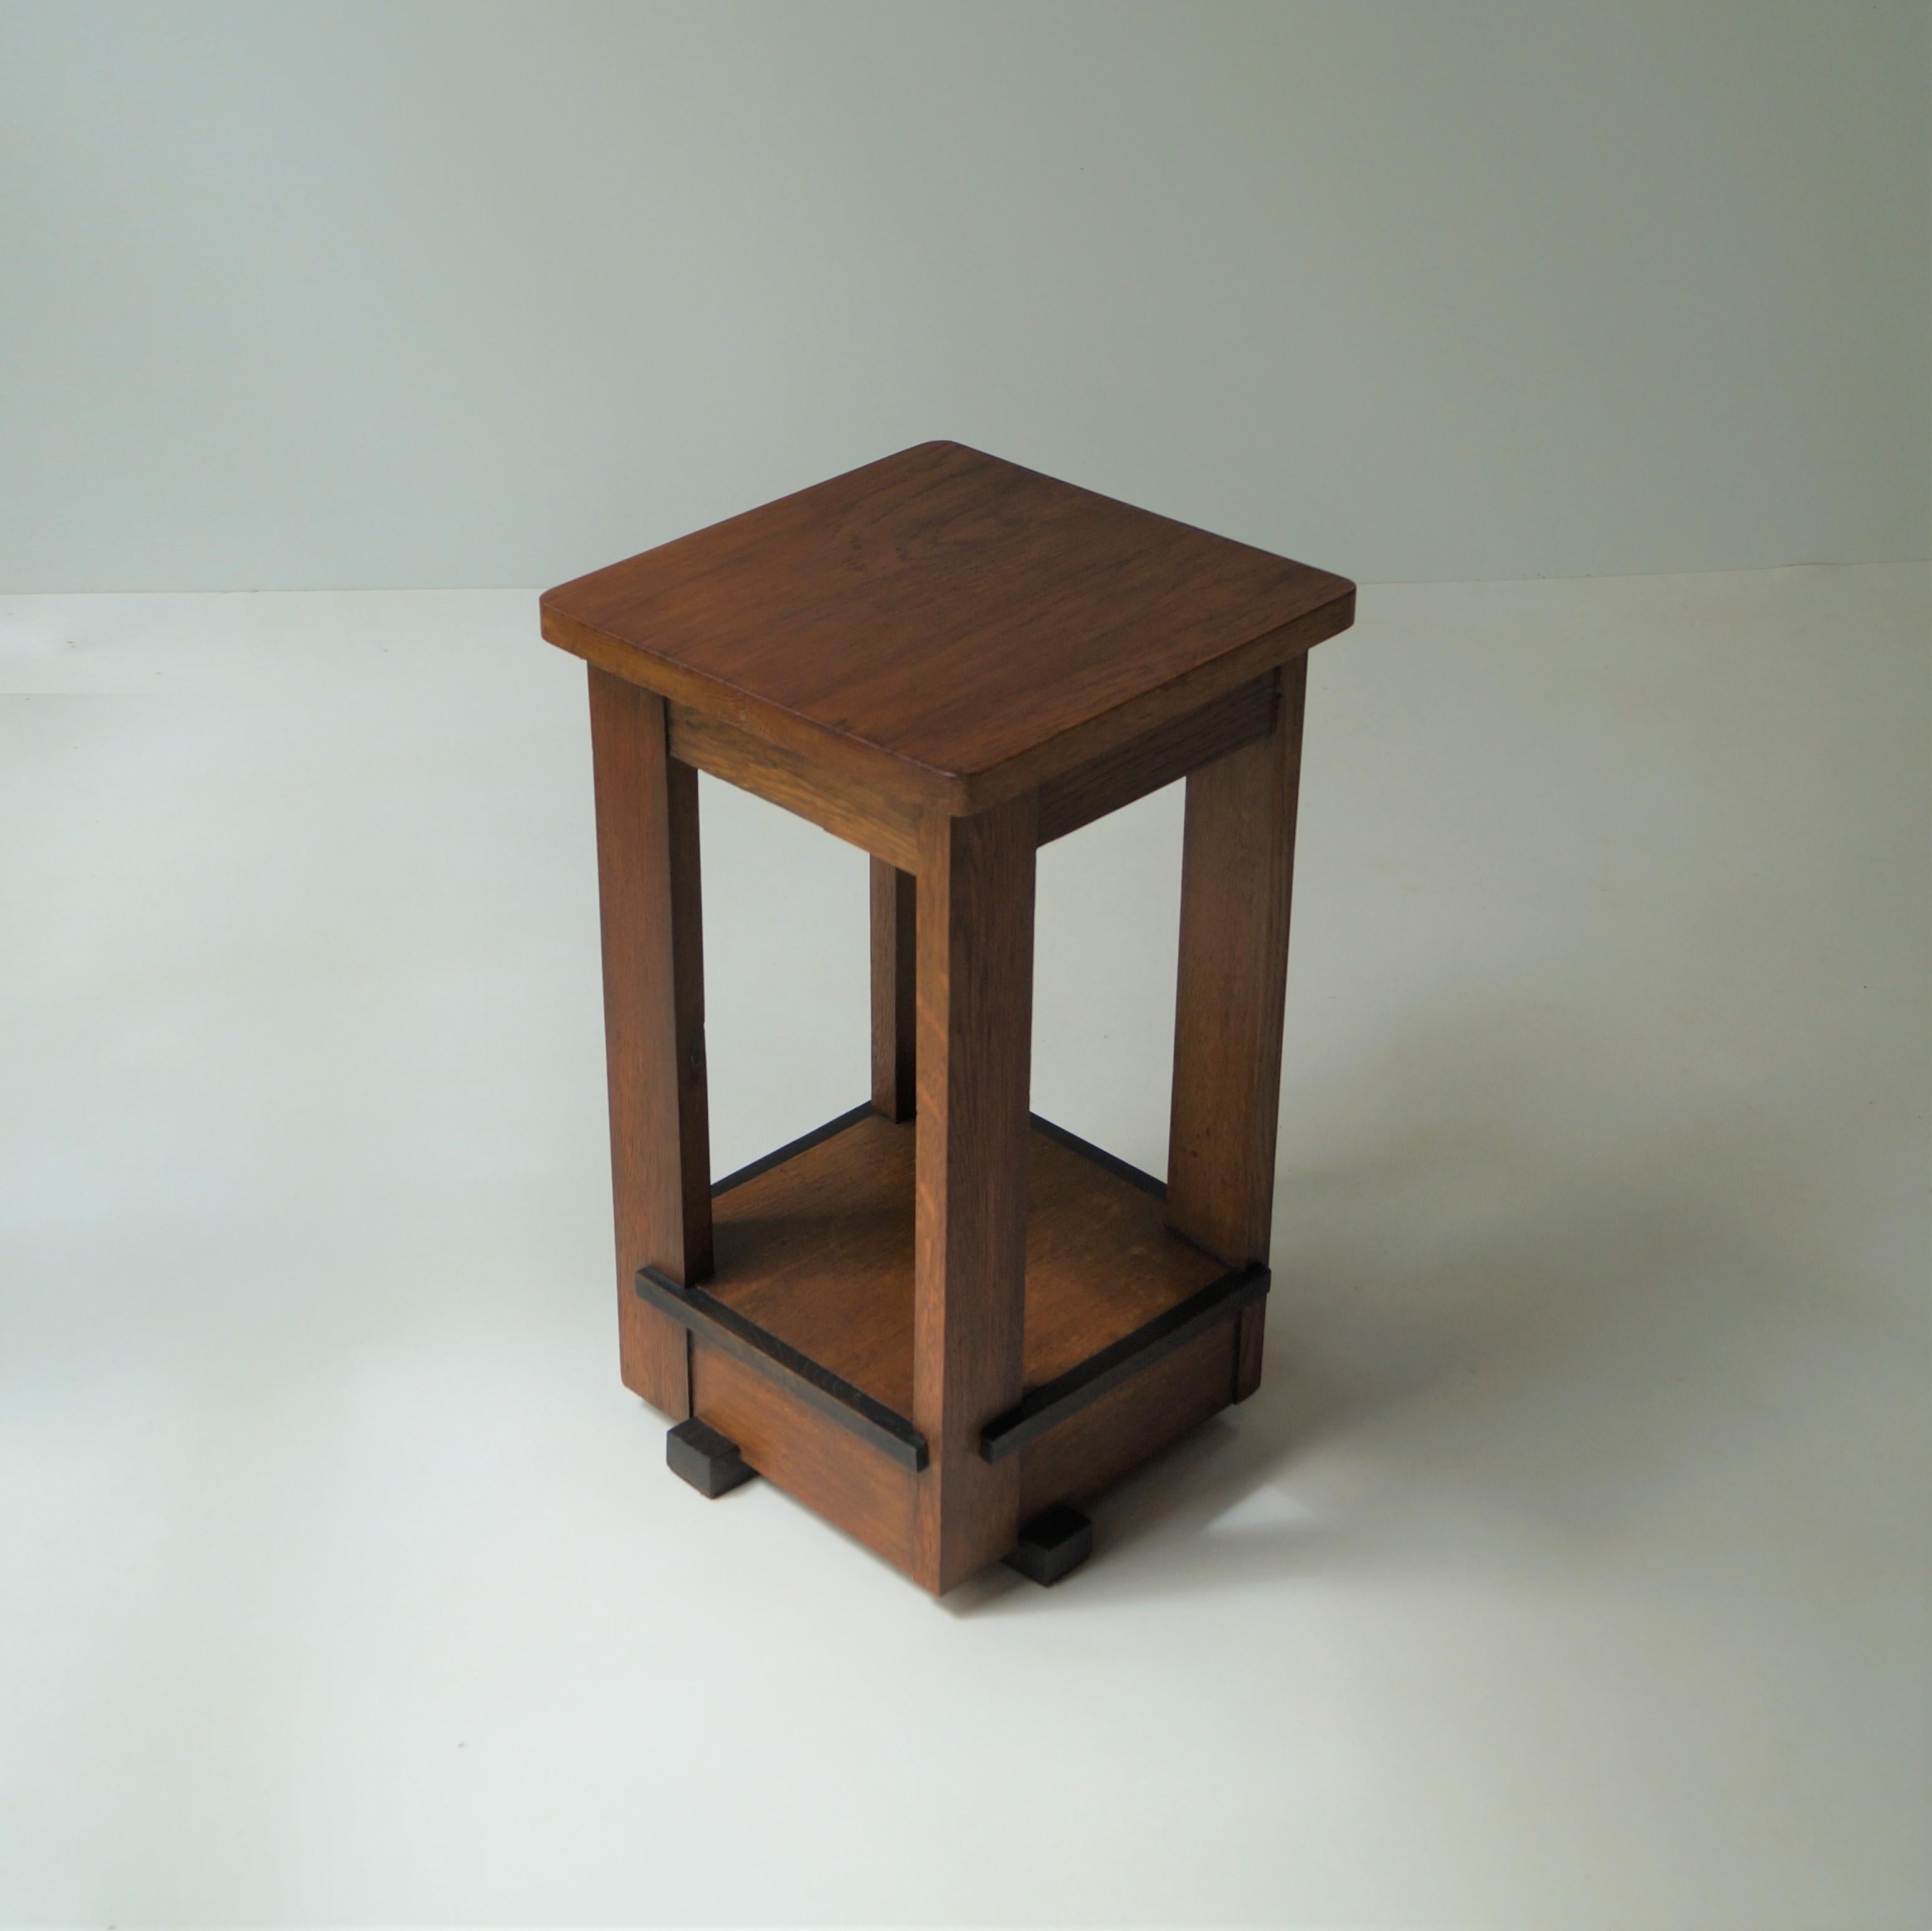 Dutch Art Deco Haagse School side table attributed to Jan Brunott, 1920s For Sale 4